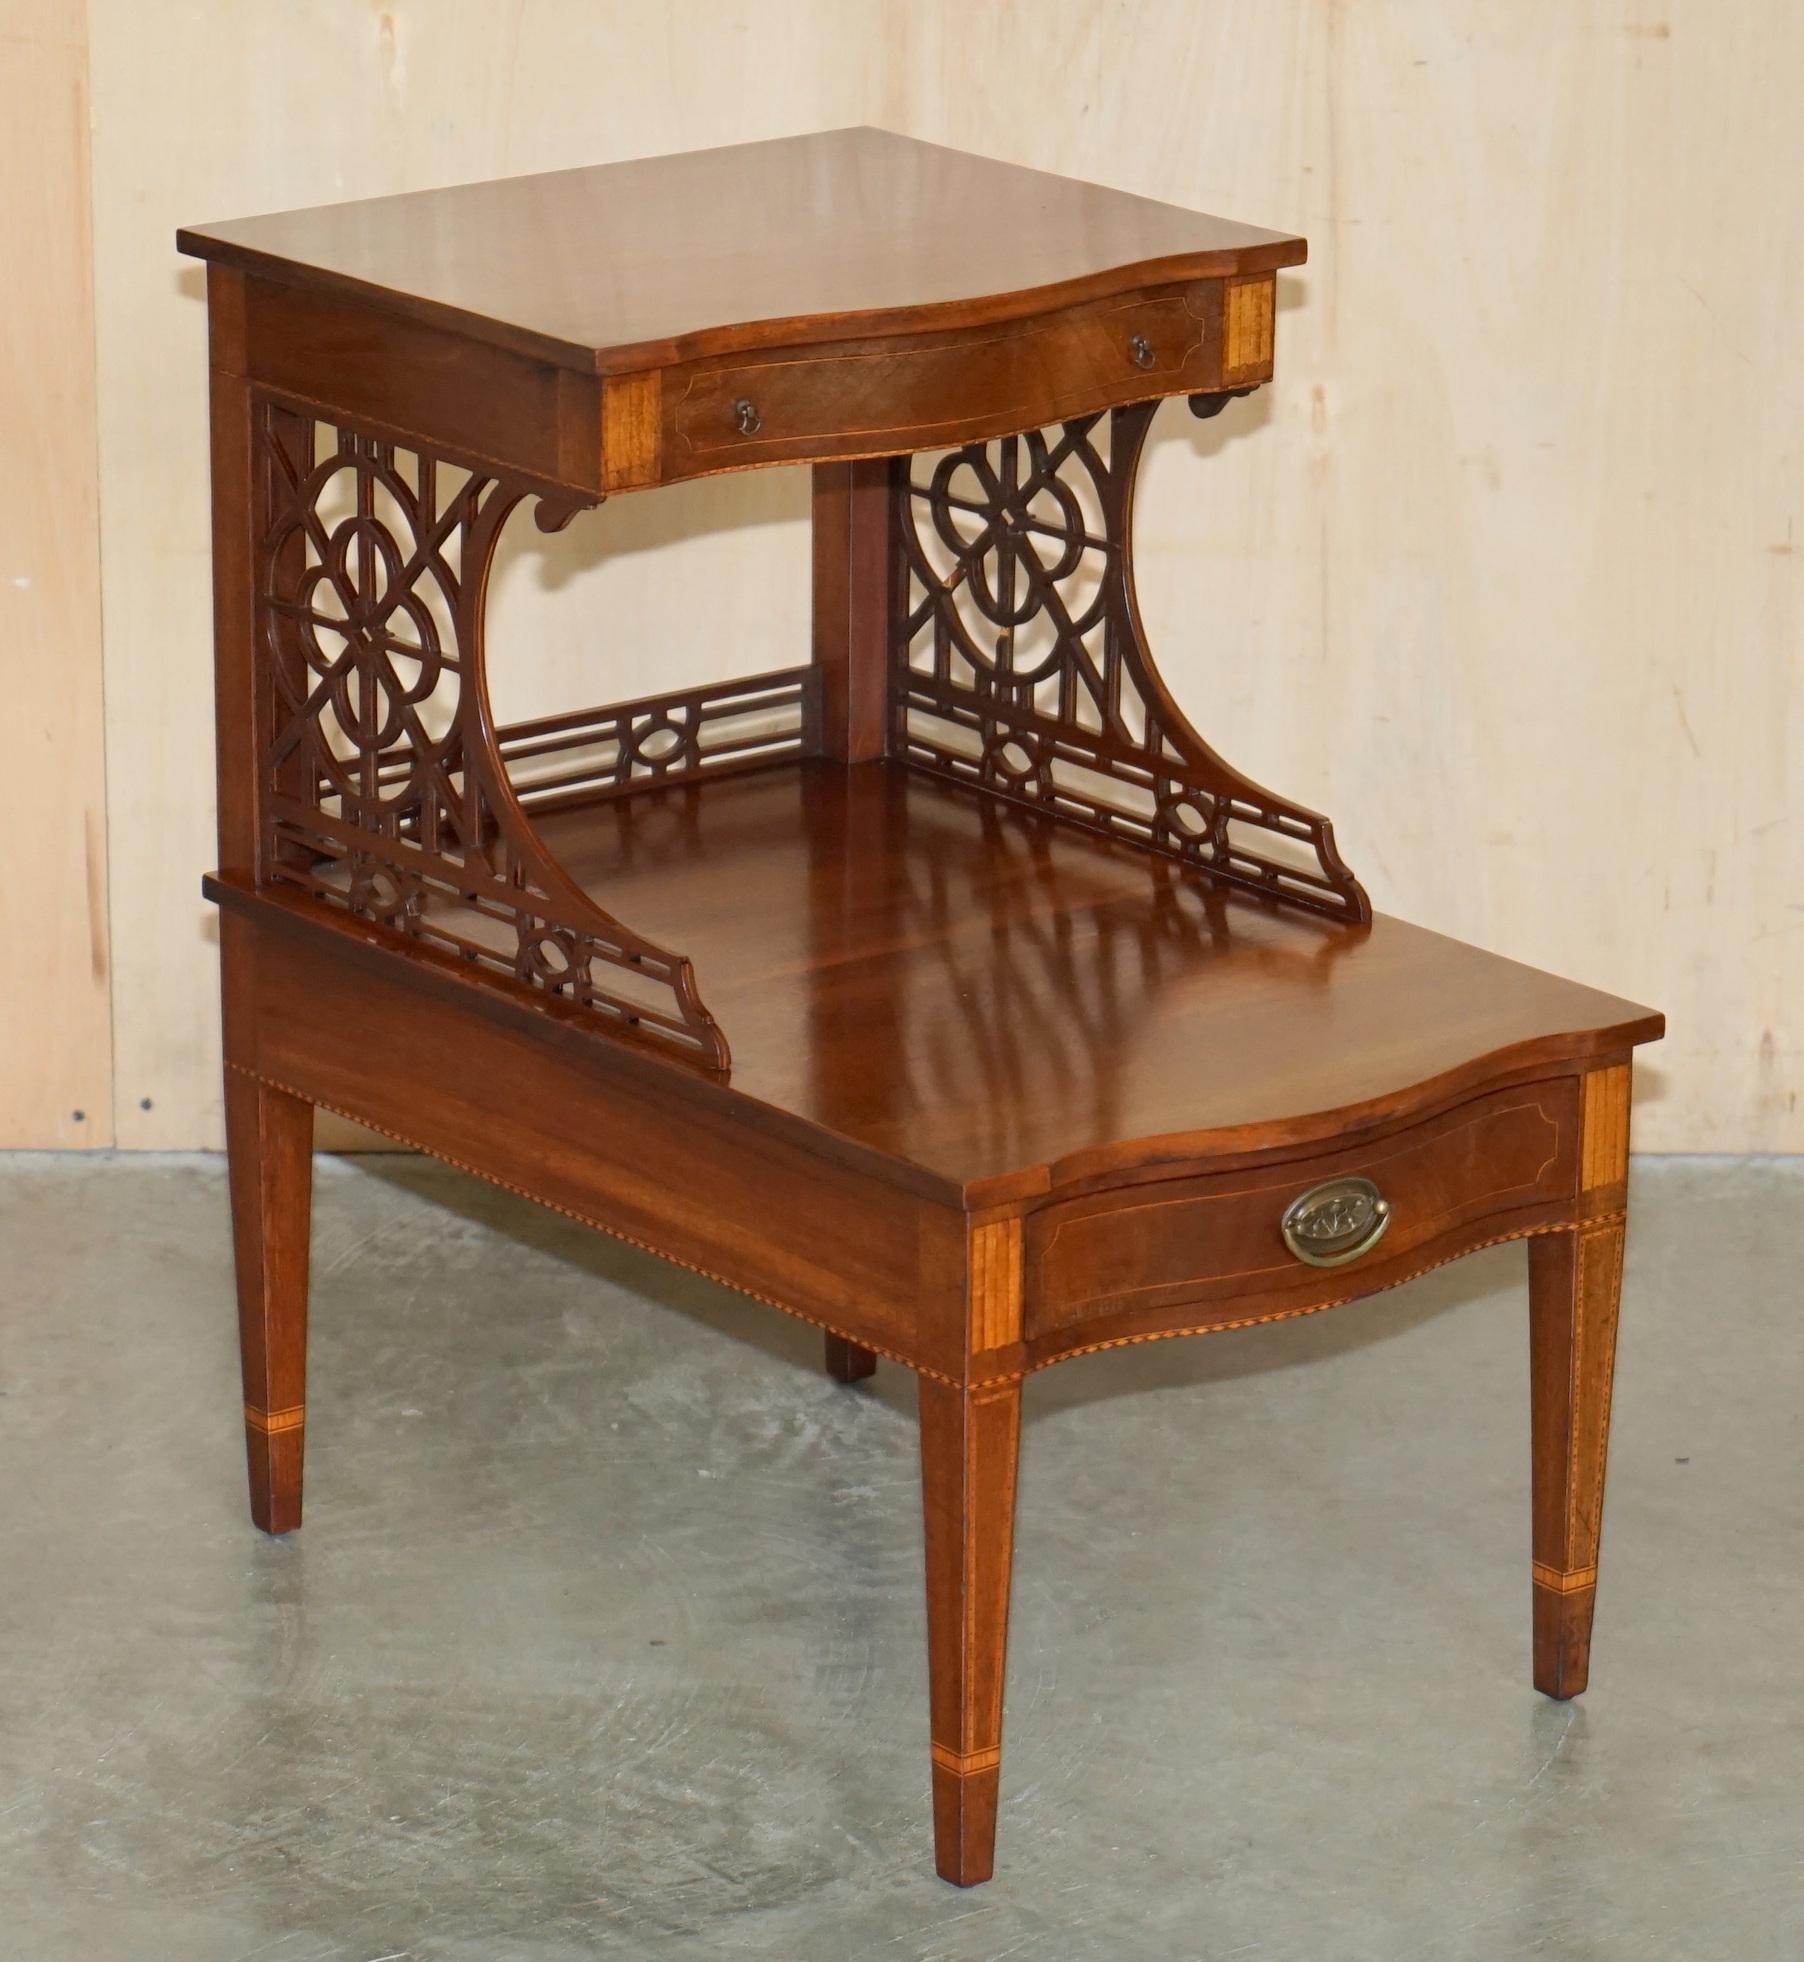 PAIR OF WALNUT FRET WORK CARVED THOMAS CHIPPENDALE SHERATON REVIVAL SIDE TABLEs For Sale 10